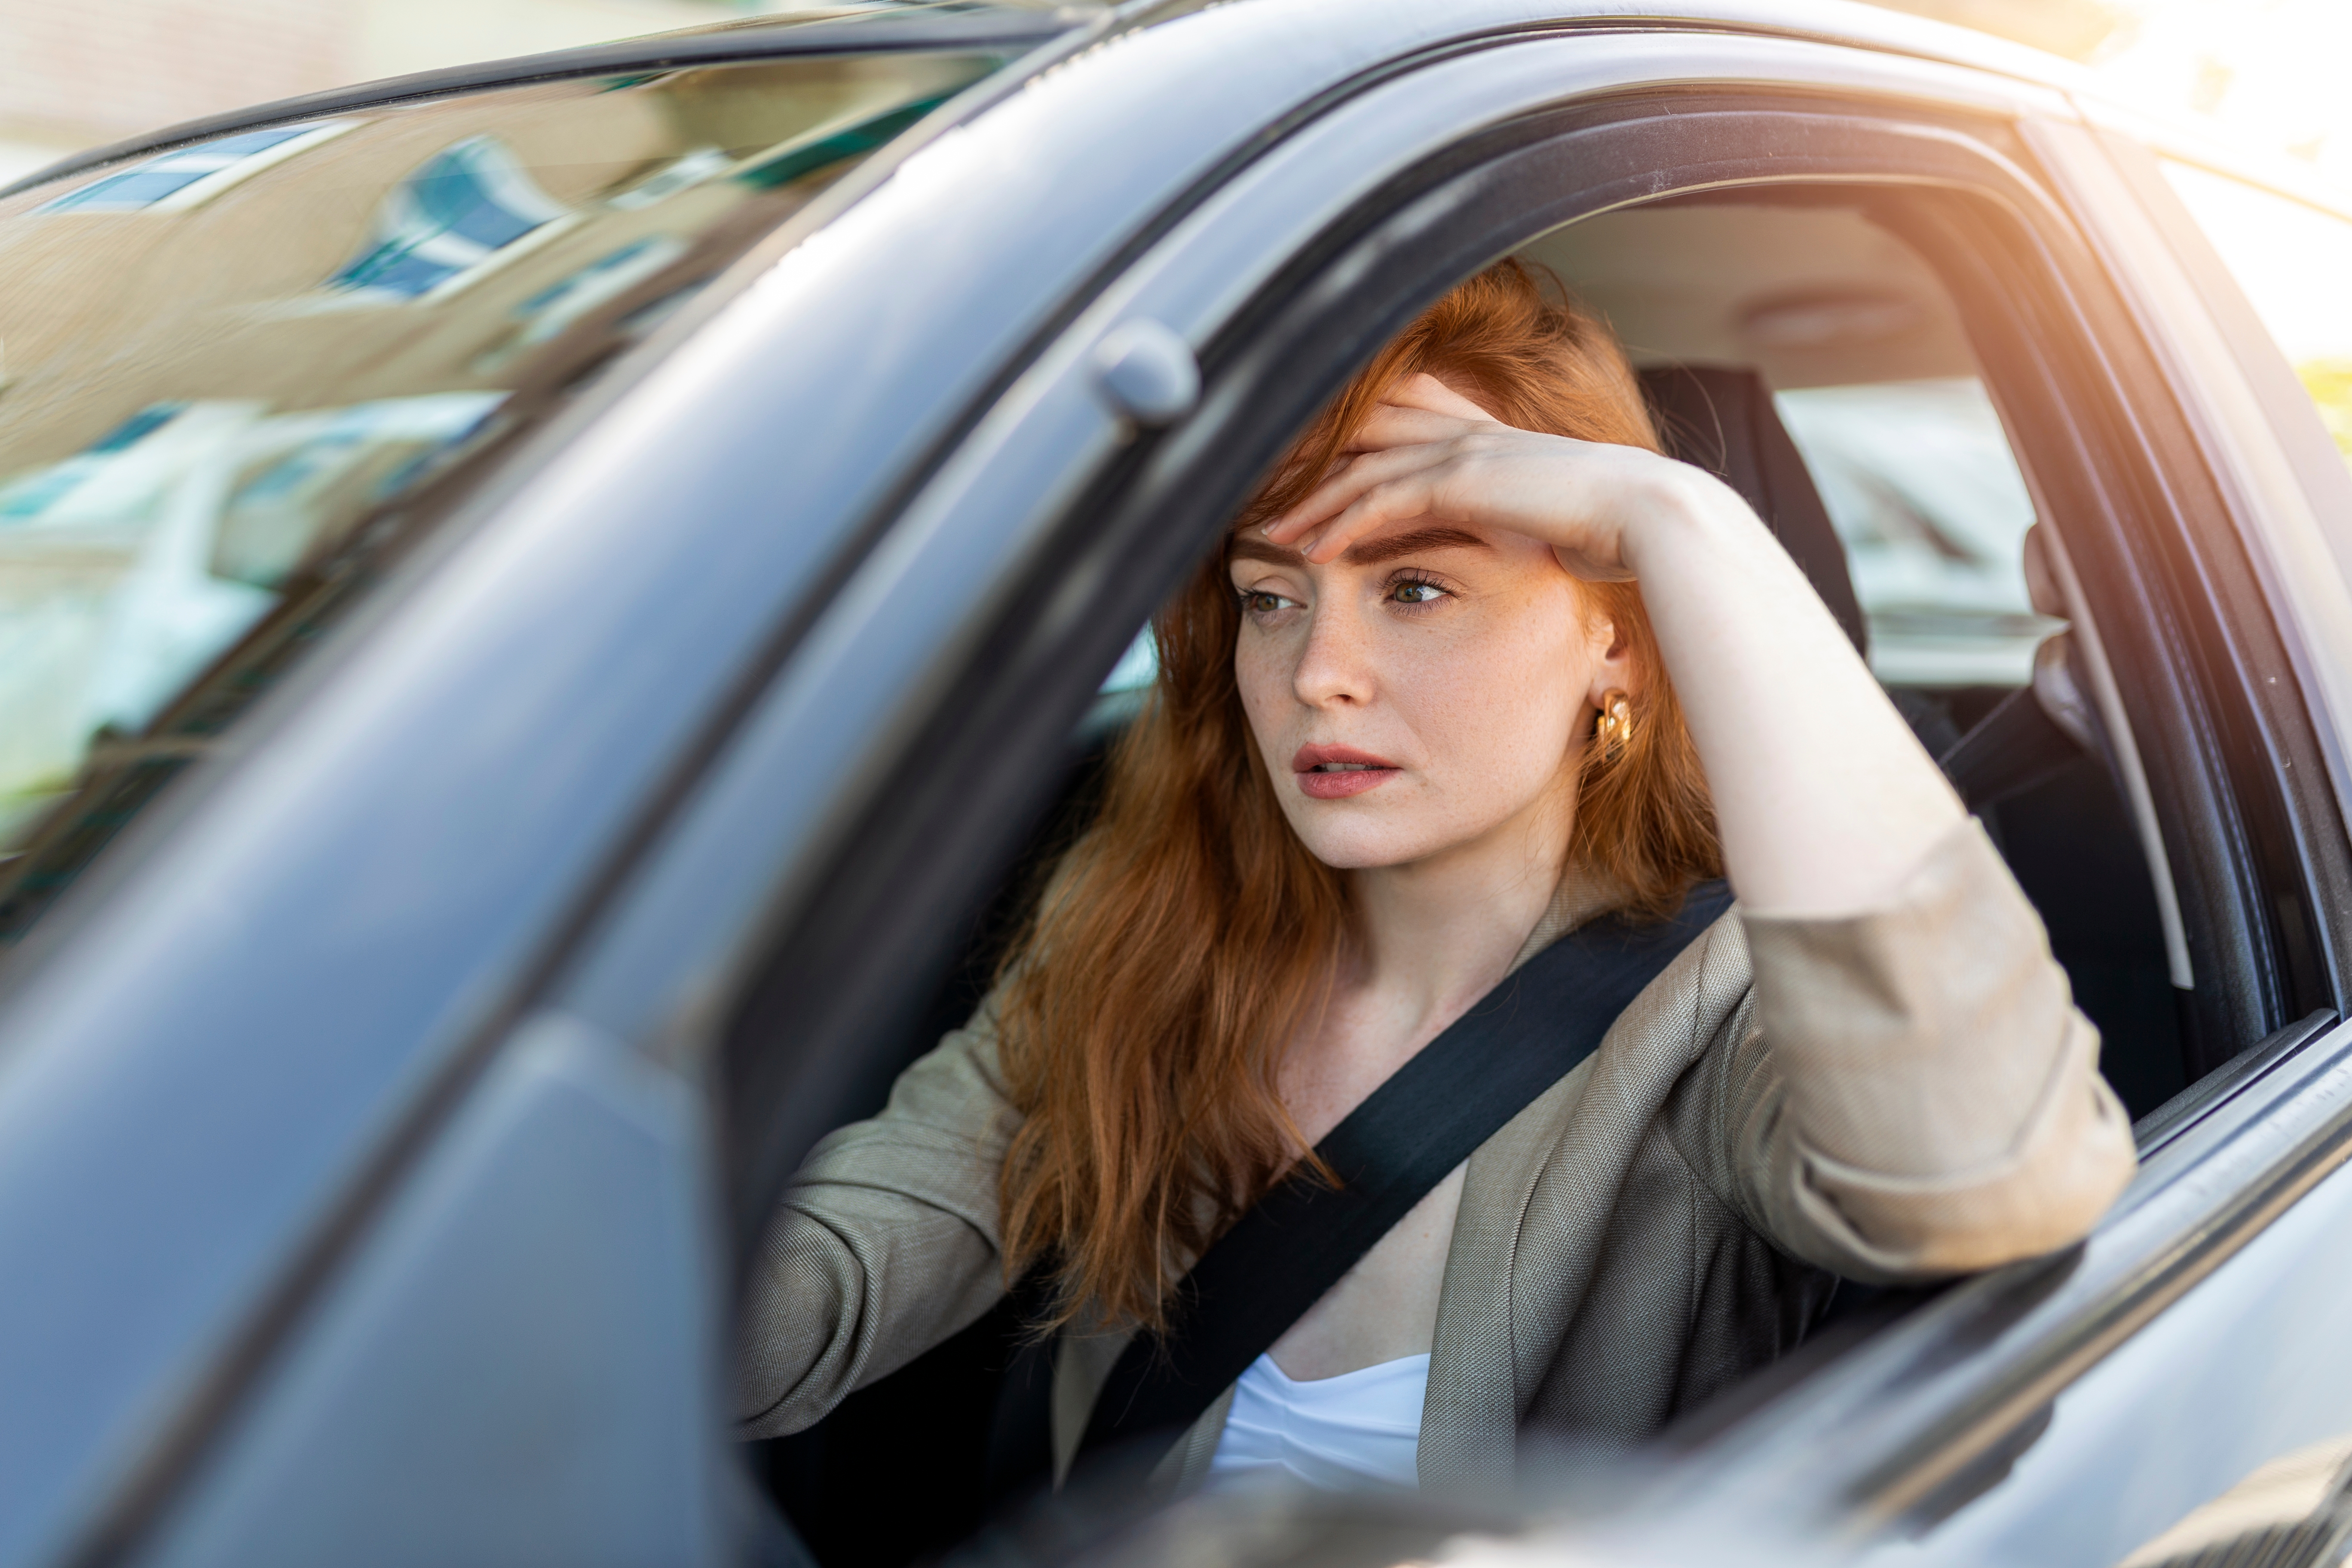 A woman looking like she is deep in thought while driving | Source: Shutterstock